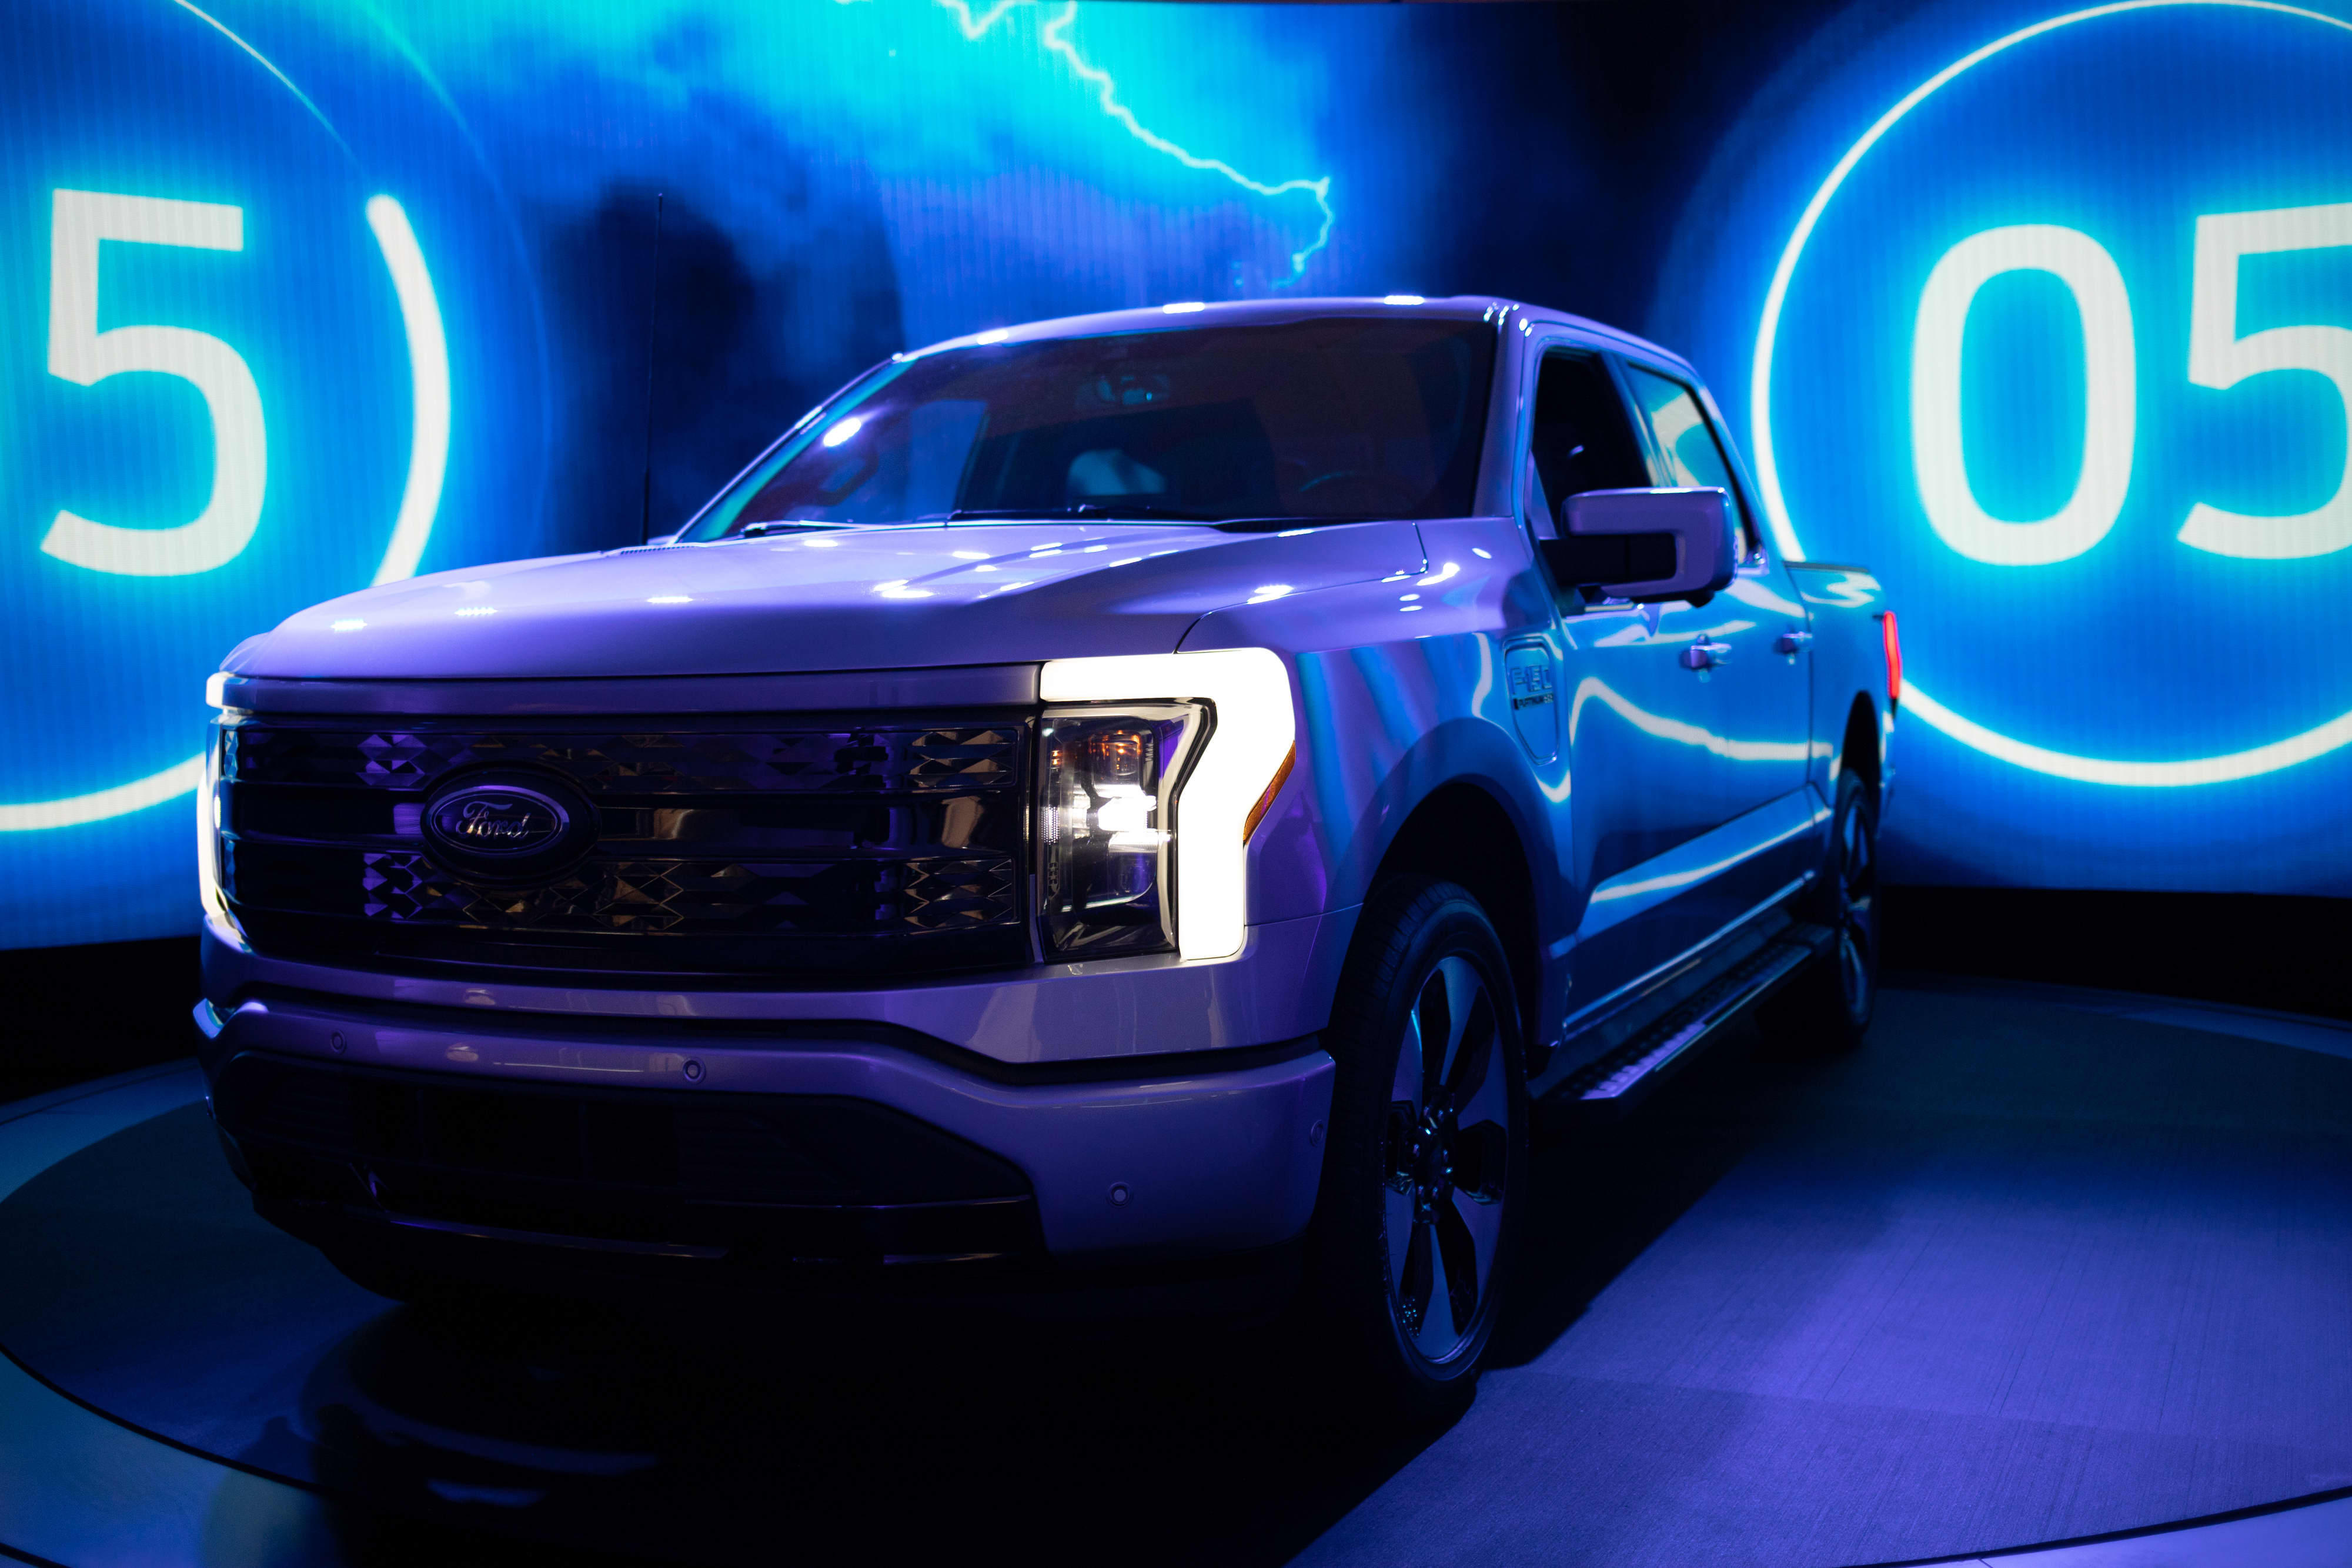 Ford beats Tesla to become auto industry’s top growth stock in 2021